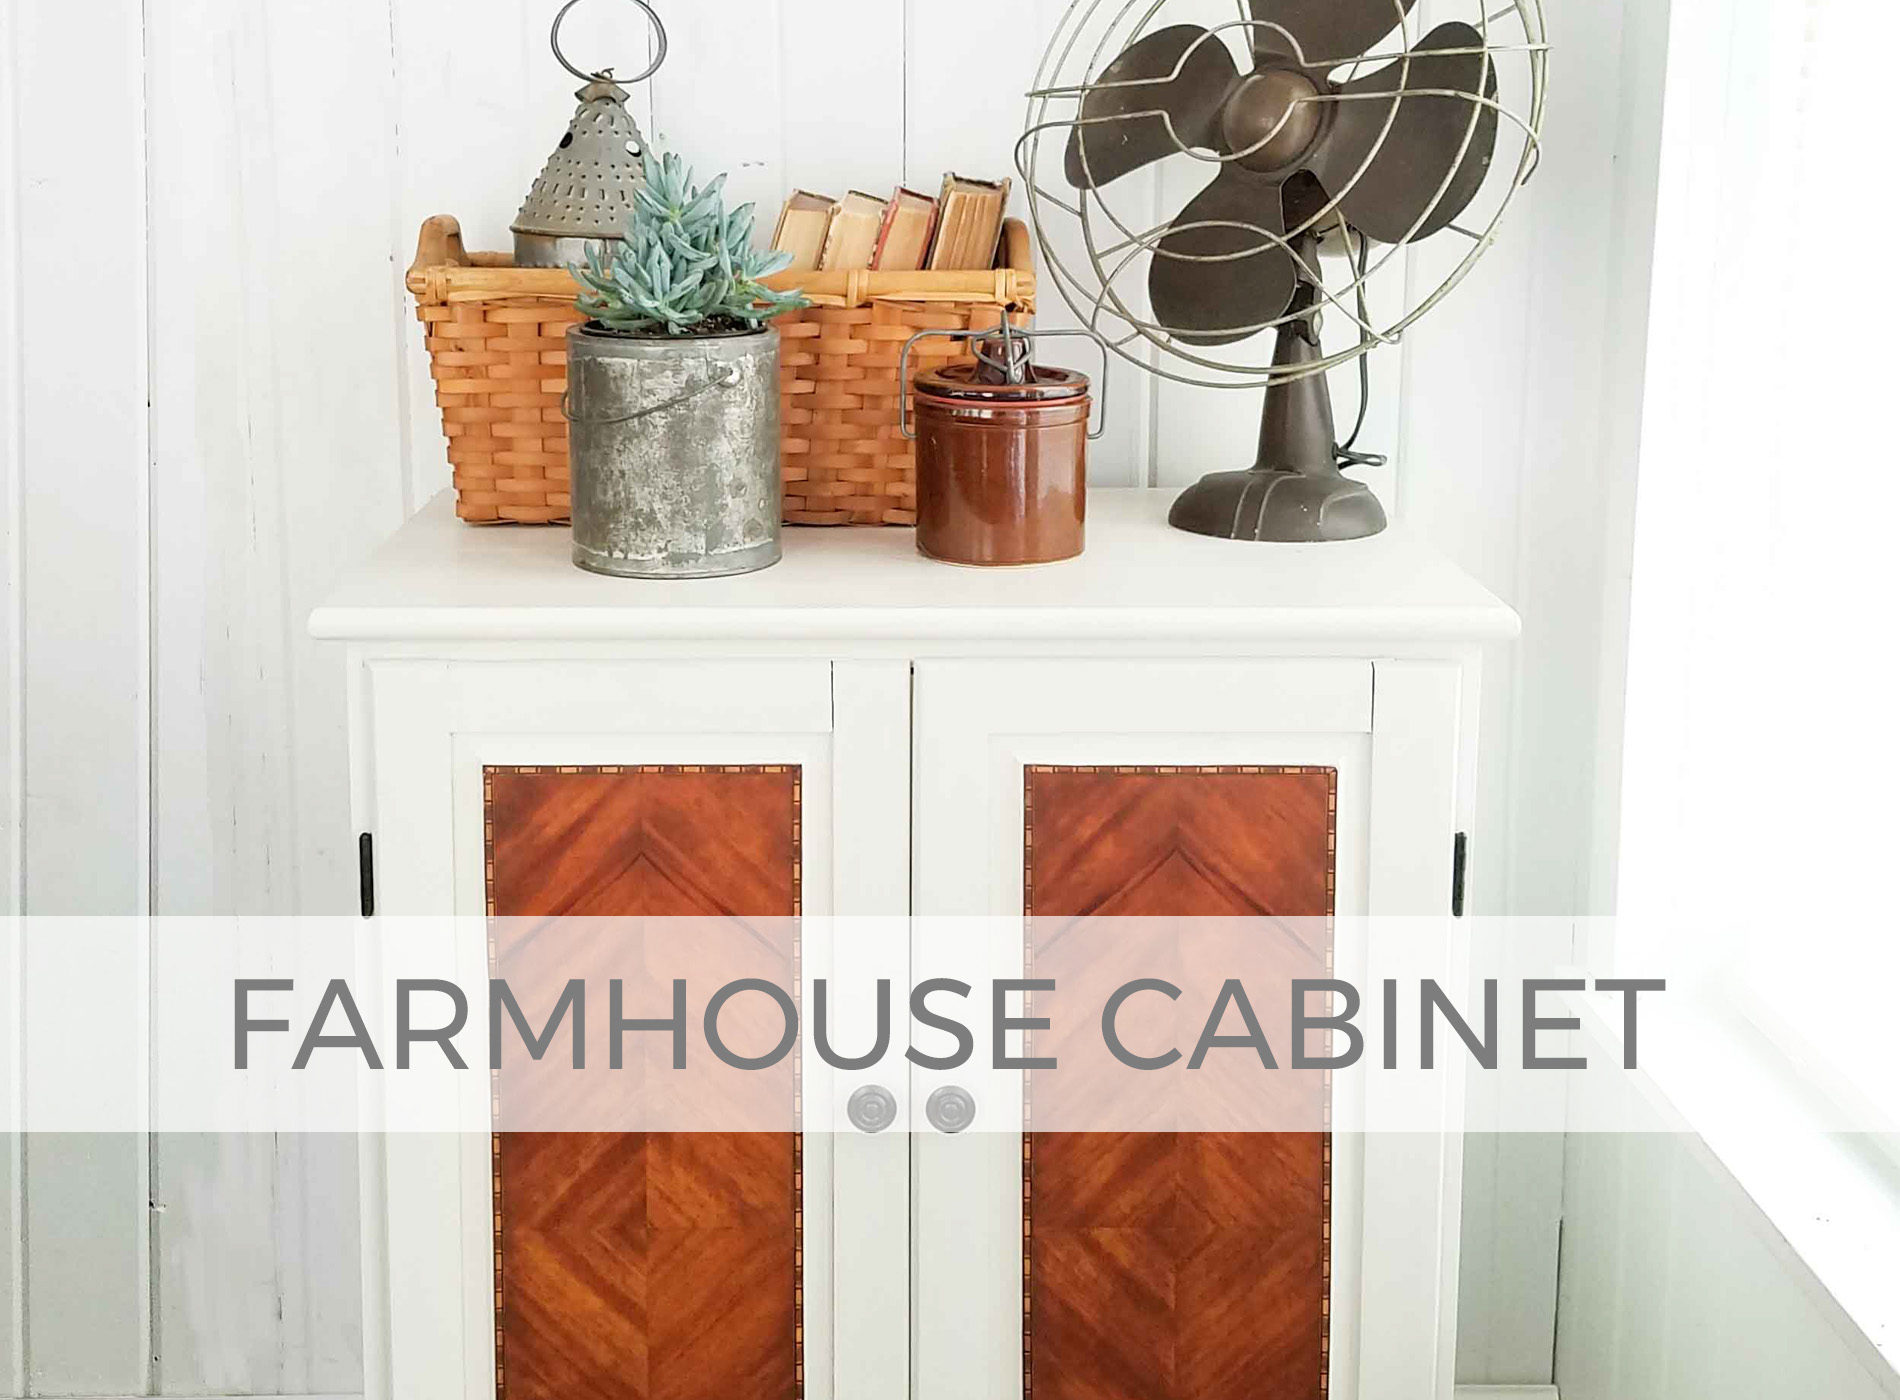 Farmhouse Chic Cabinet by Larissa of Prodigal Pieces | prodigalpieces.com #prodigalpieces